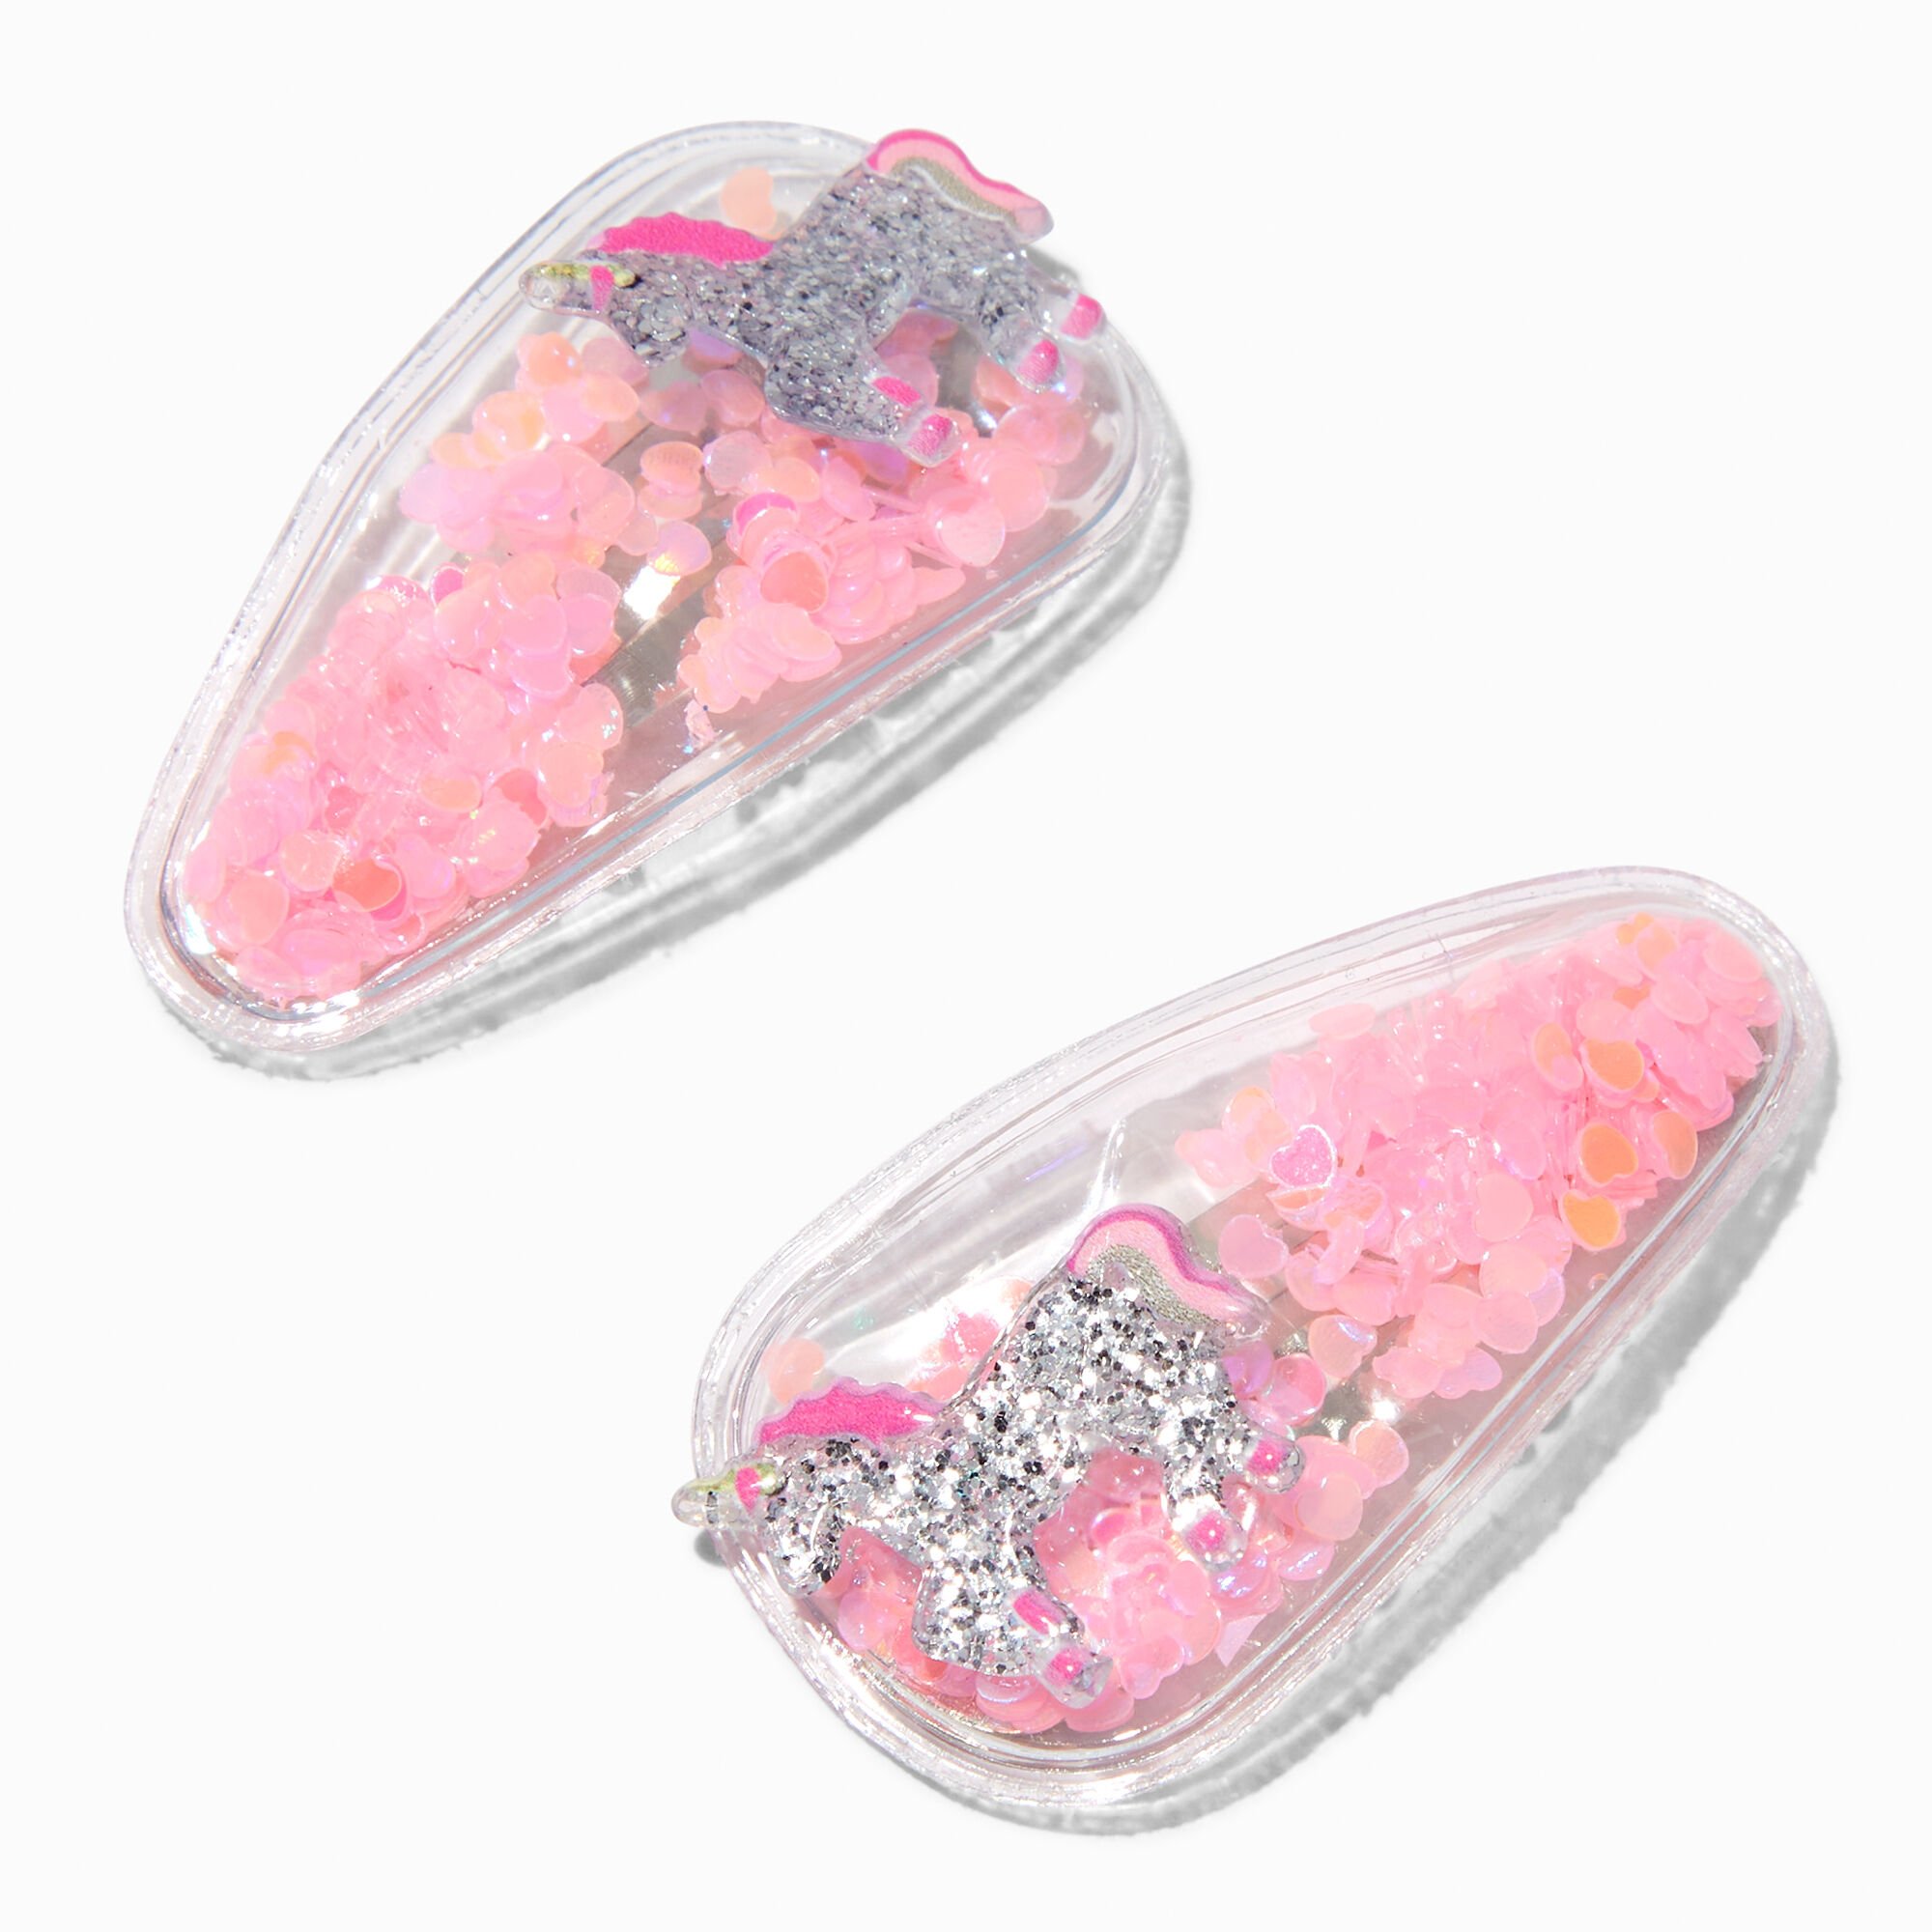 View Claires Club Unicorn Shaker Snap Hair Clips 2 Pack information